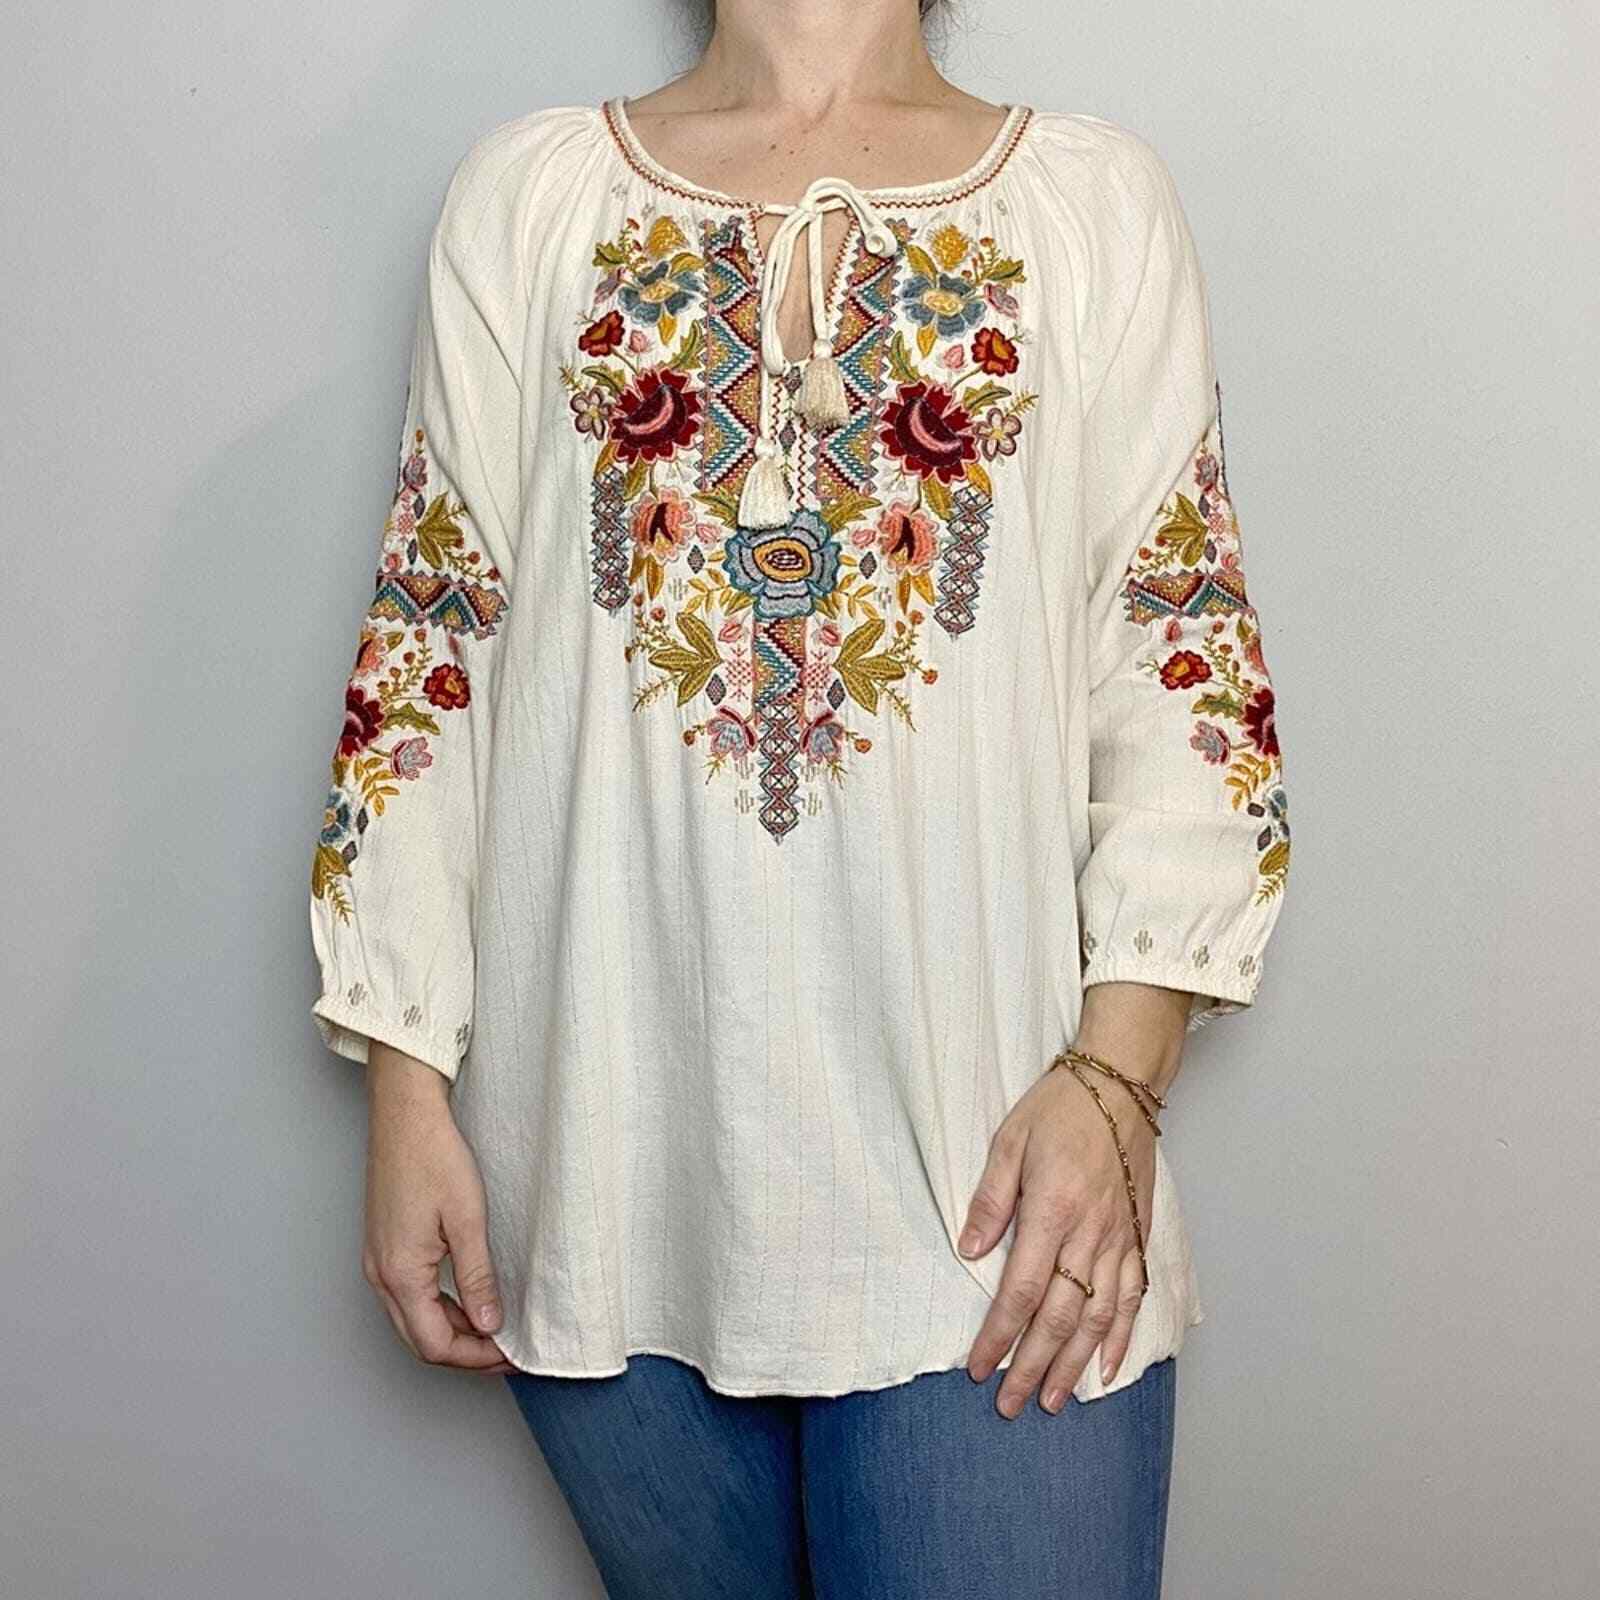 Johnny Was WOMEN'S SIZE SMALL Clancy Embroidered Peasant Blouse